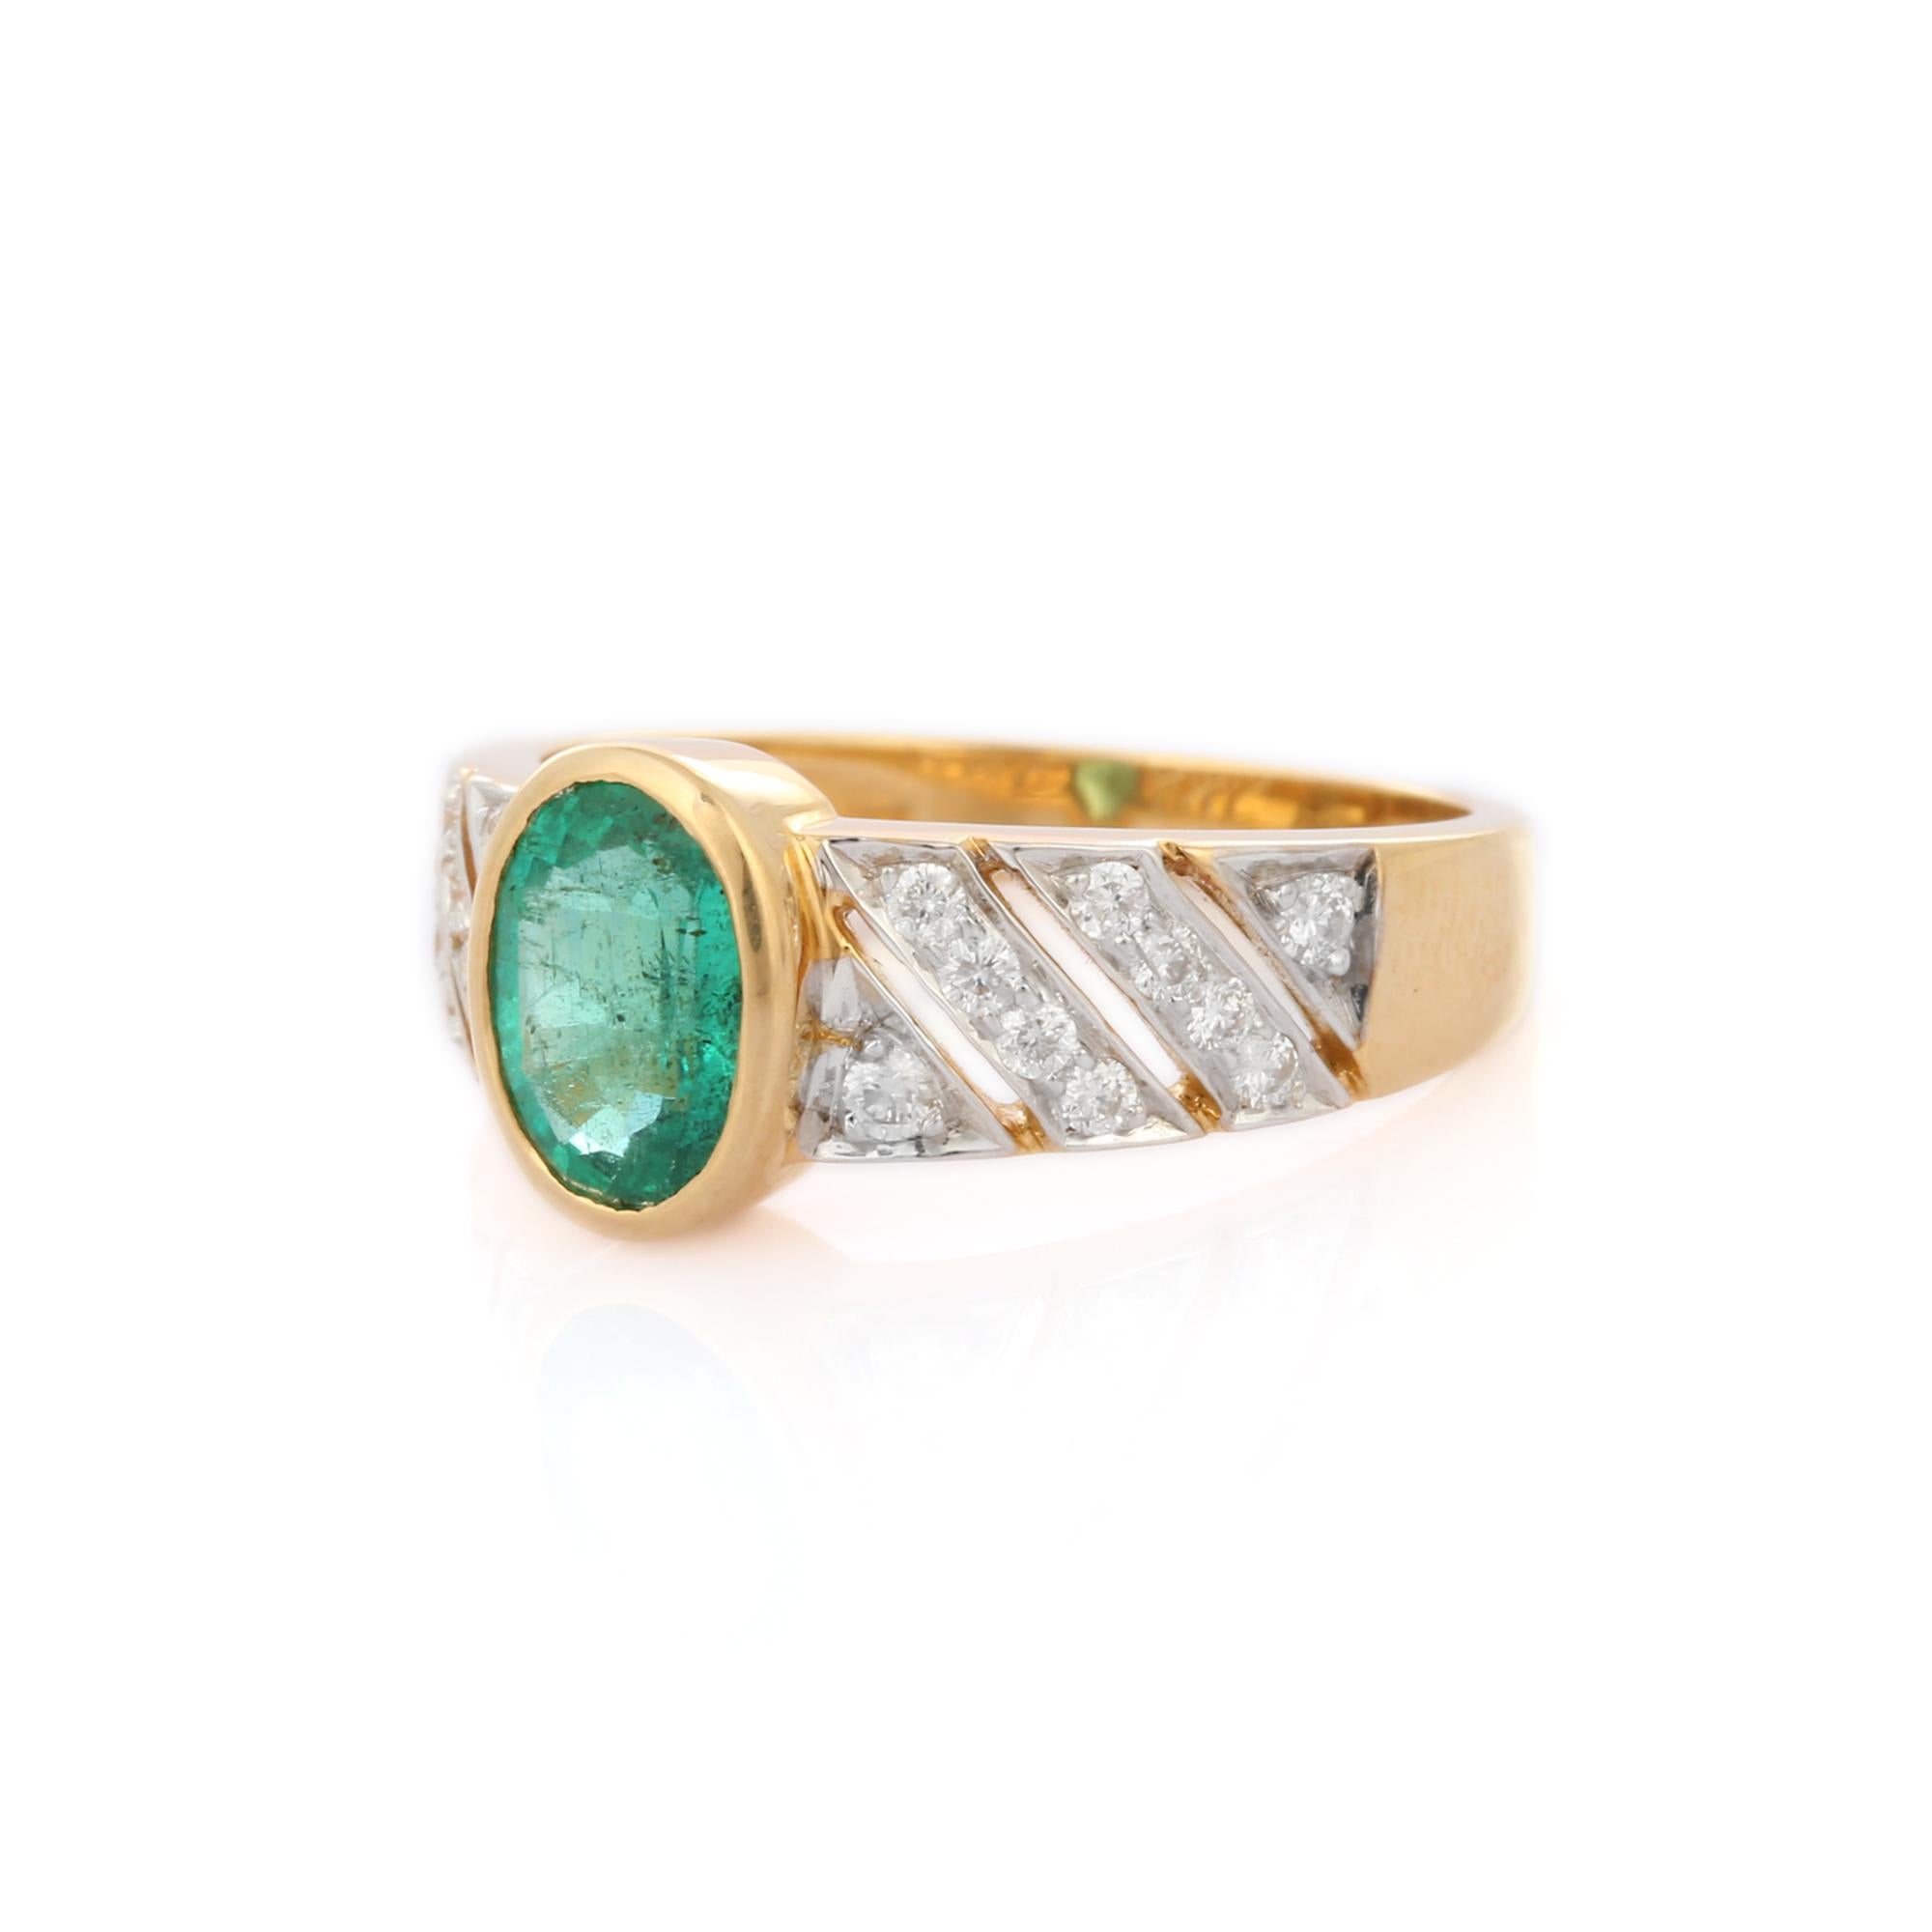 For Sale:  Exquisite 1.11 Ct Emerald Gemstone & Diamonds Engagement Ring in 18K Yellow Gold 3